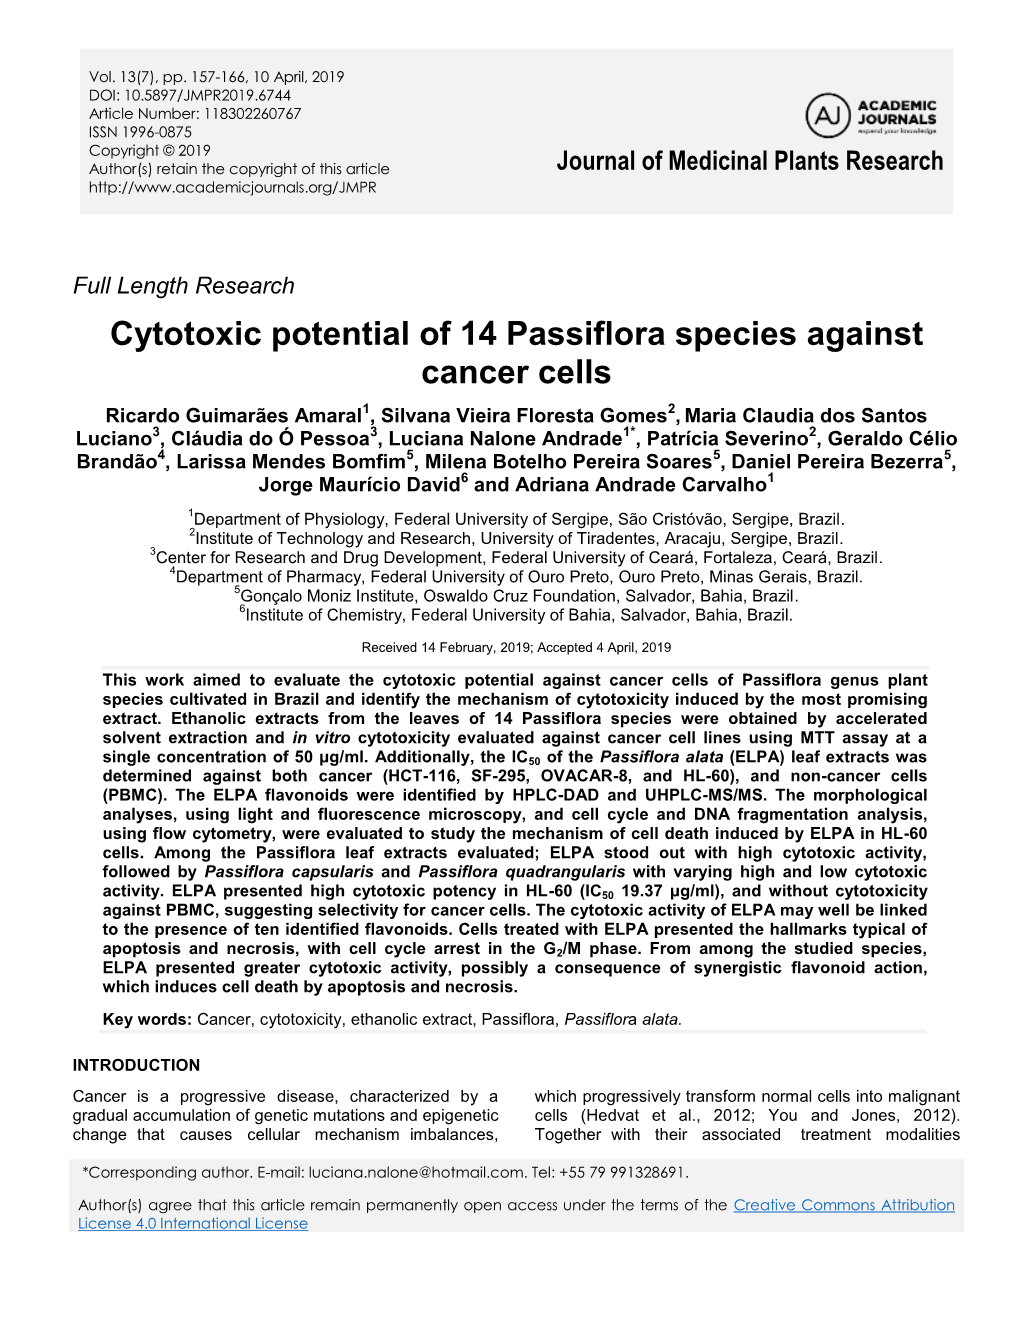 Cytotoxic Potential of 14 Passiflora Species Against Cancer Cells